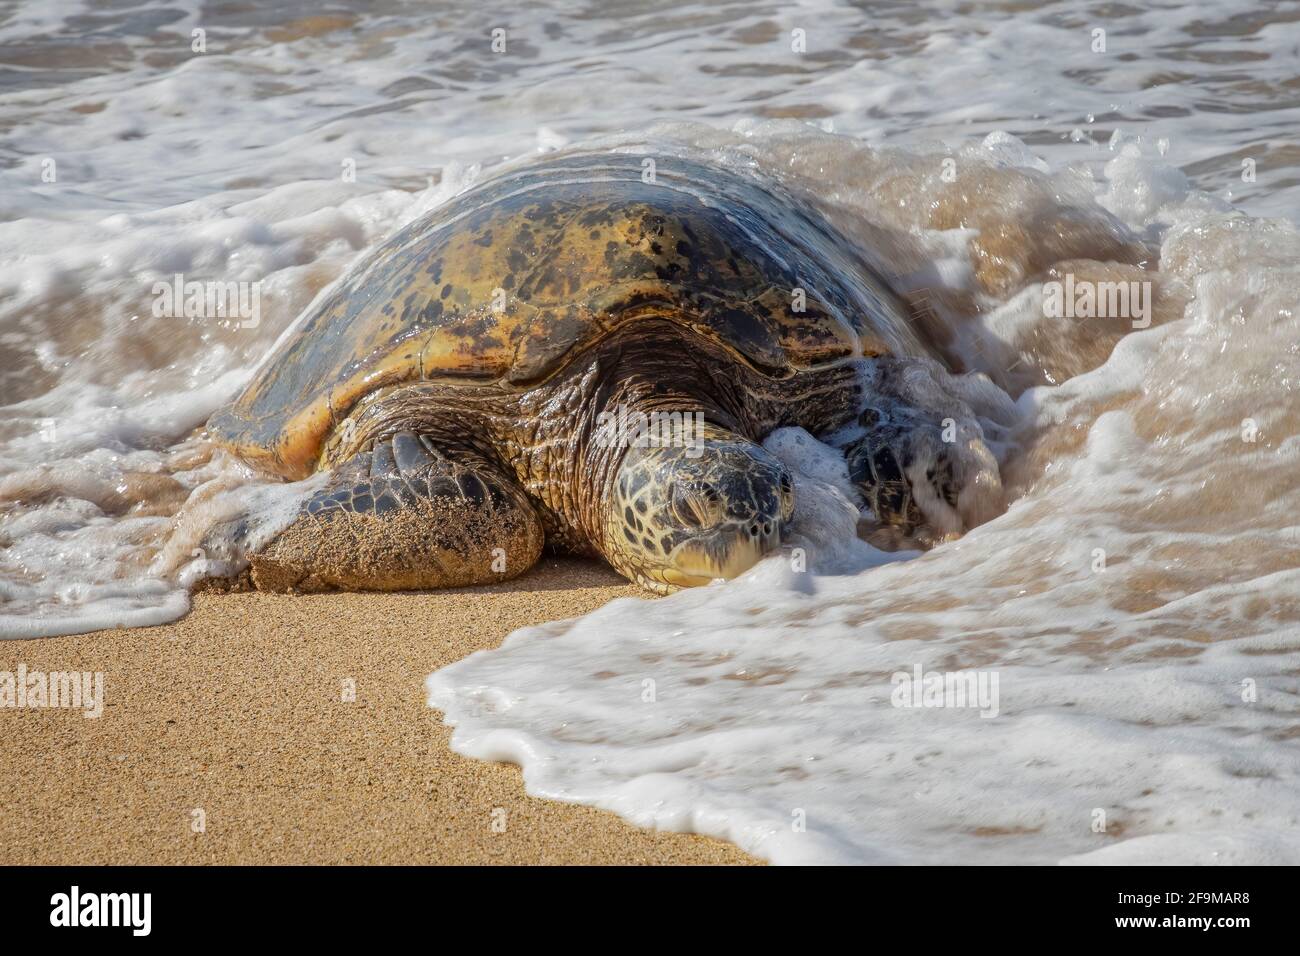 Hawaiian green sea turtle hauls out of foamy surf onto sandy beach in close up low angle view. Stock Photo